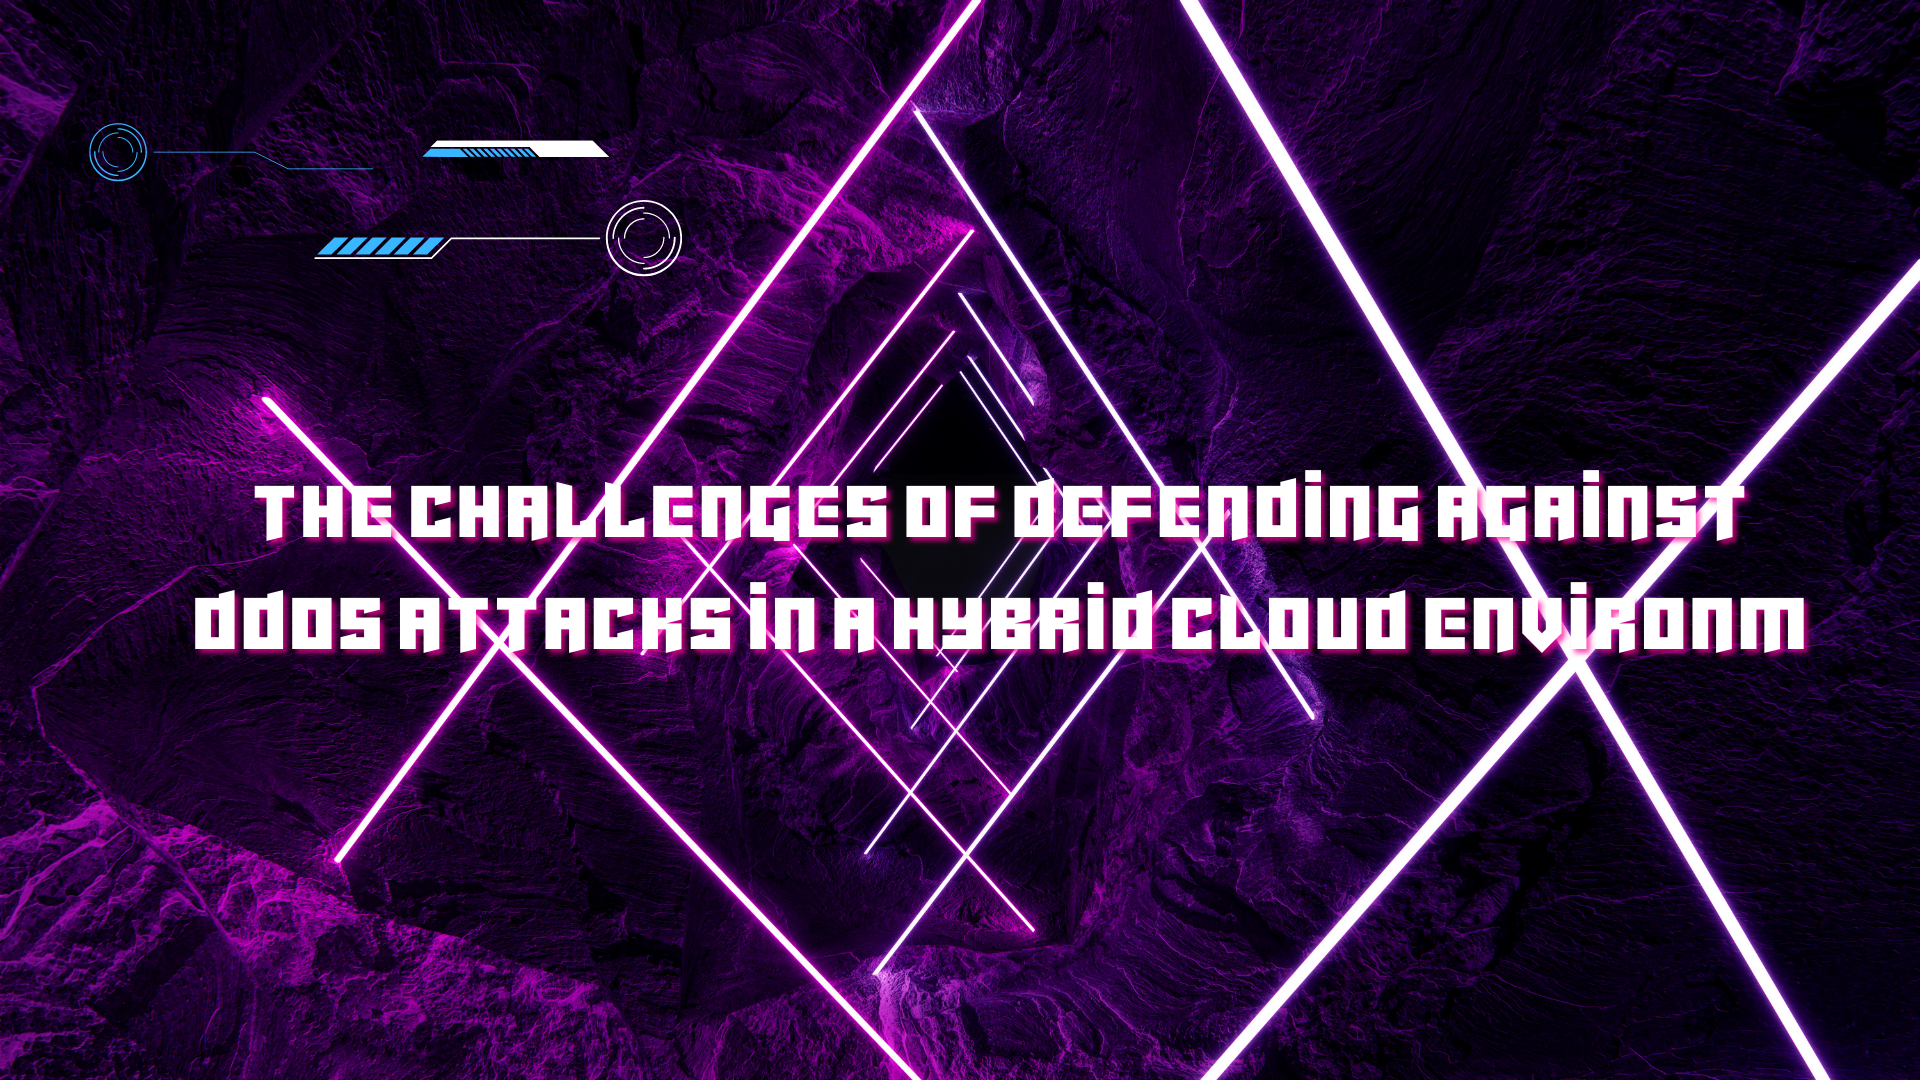 The challenges of defending against DDoS attacks in a hybrid cloud environm